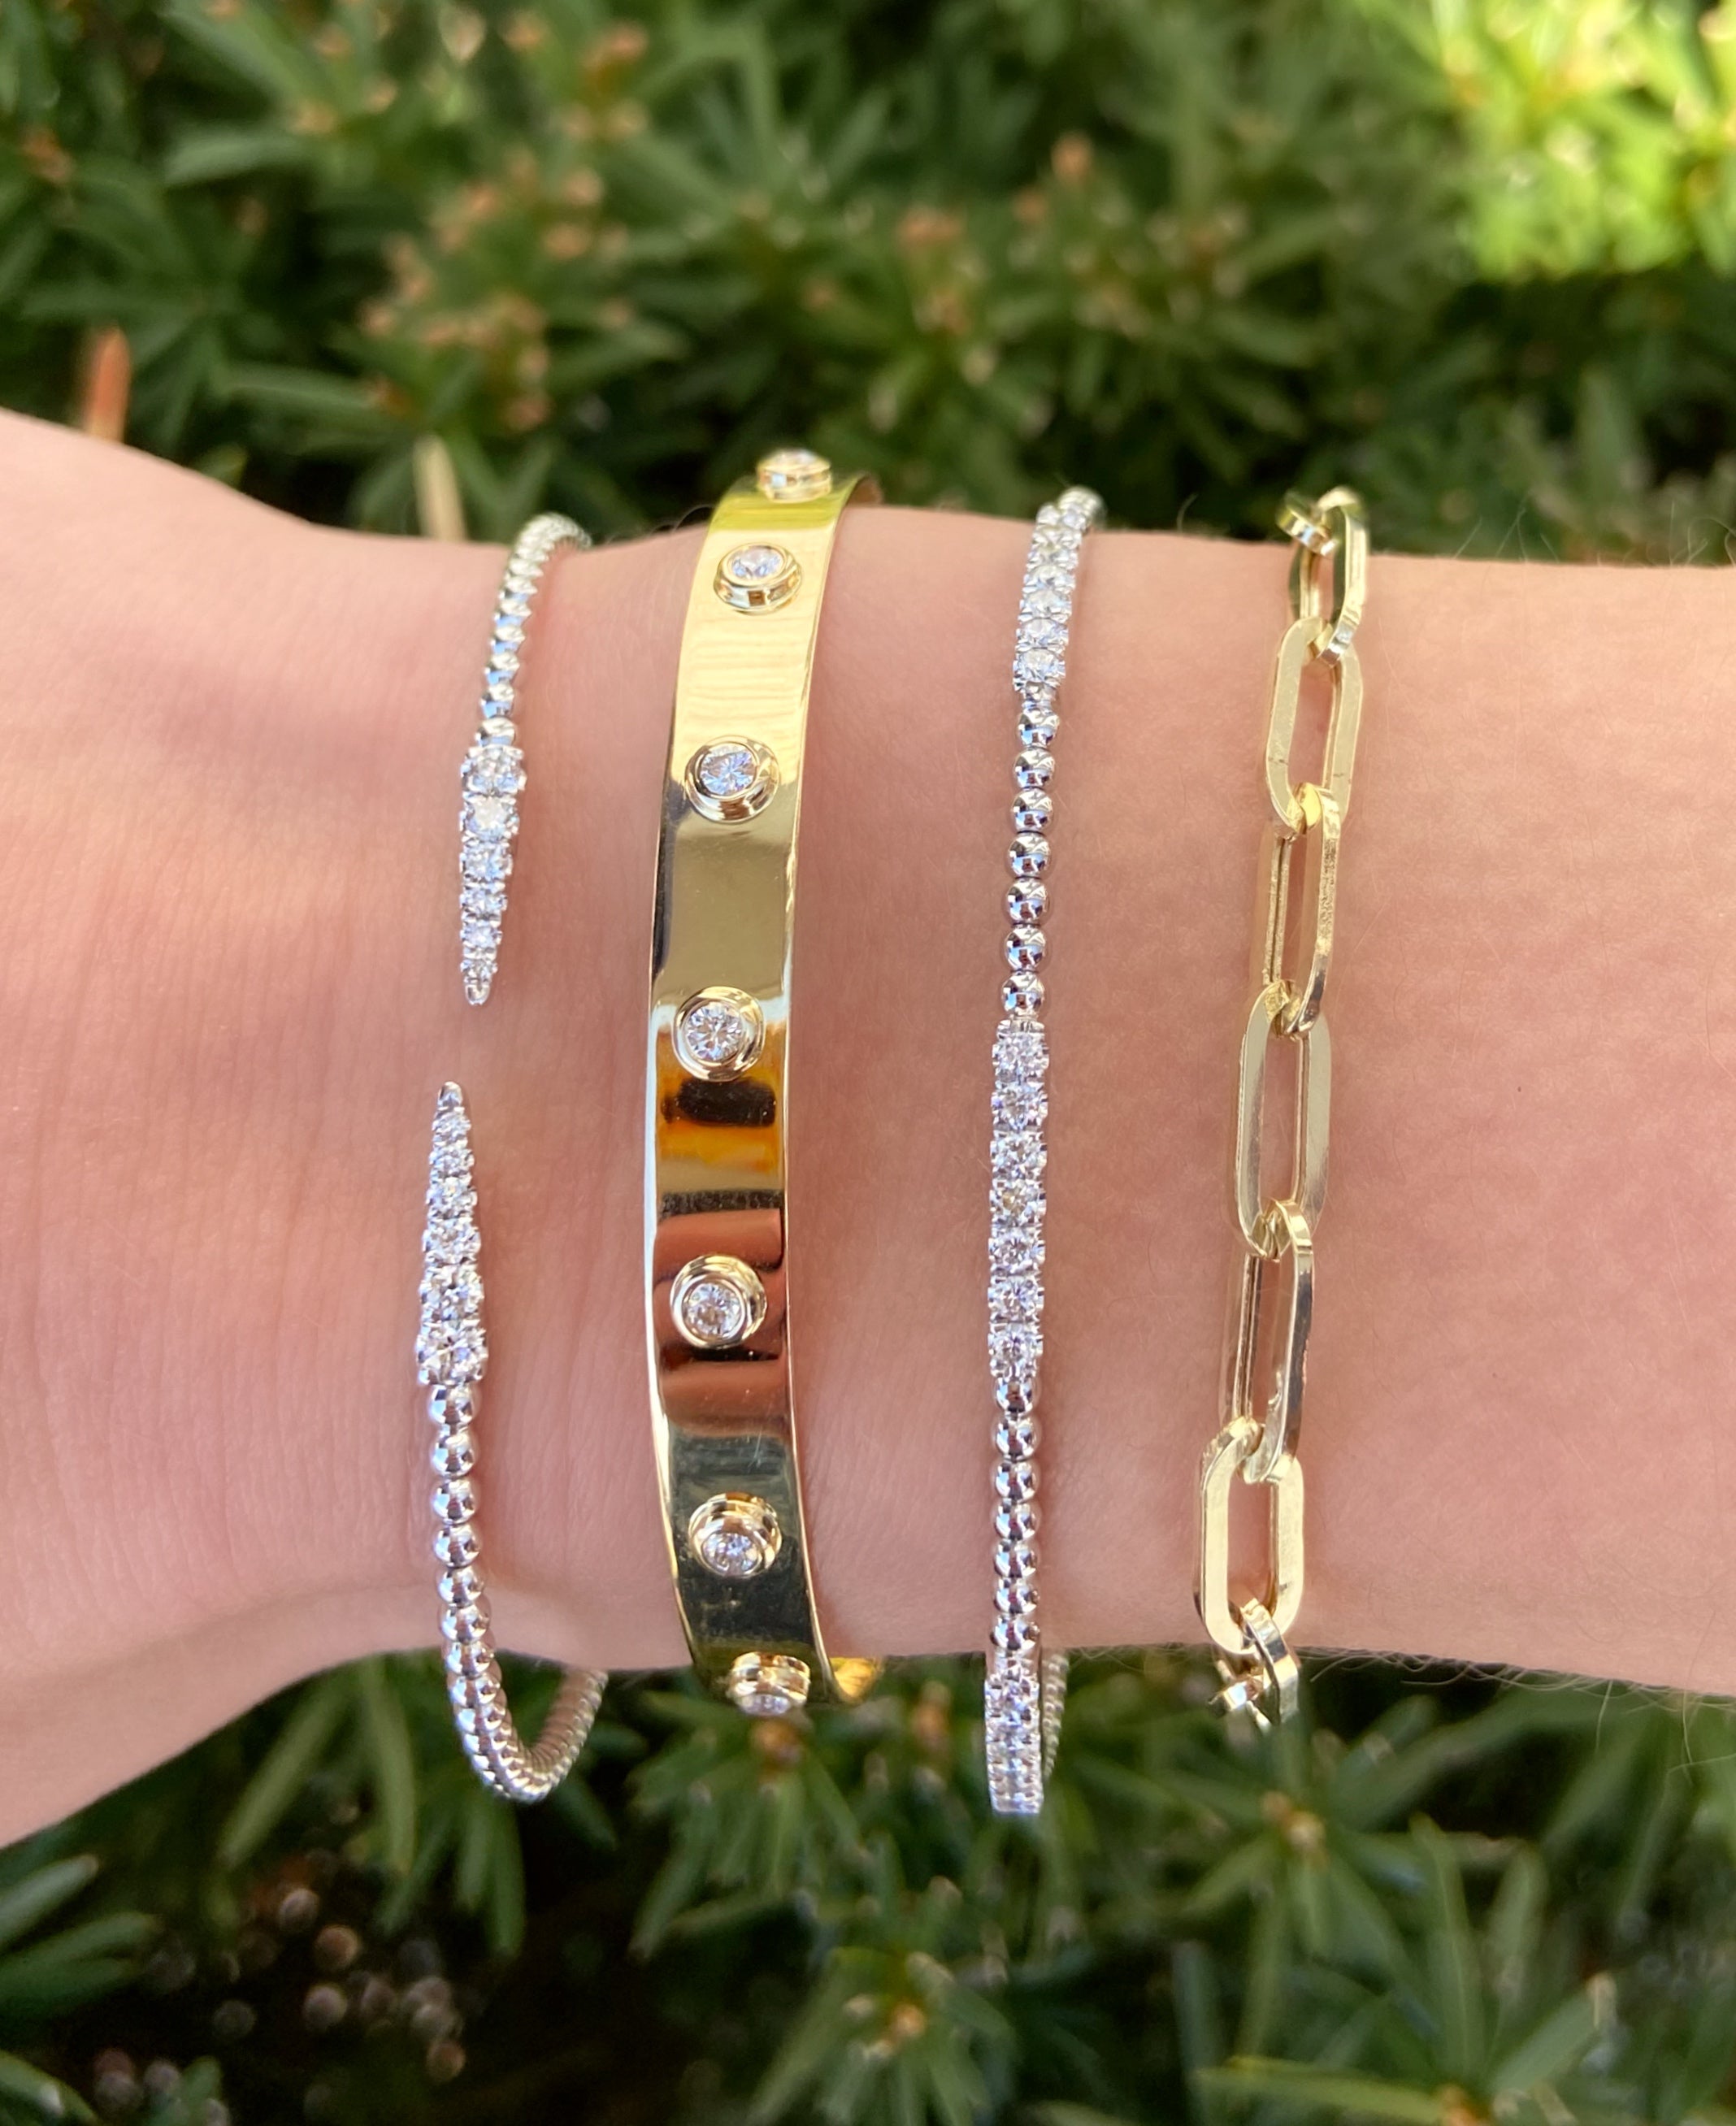 BERRY SQUARE BRACELET – The Brave Collection